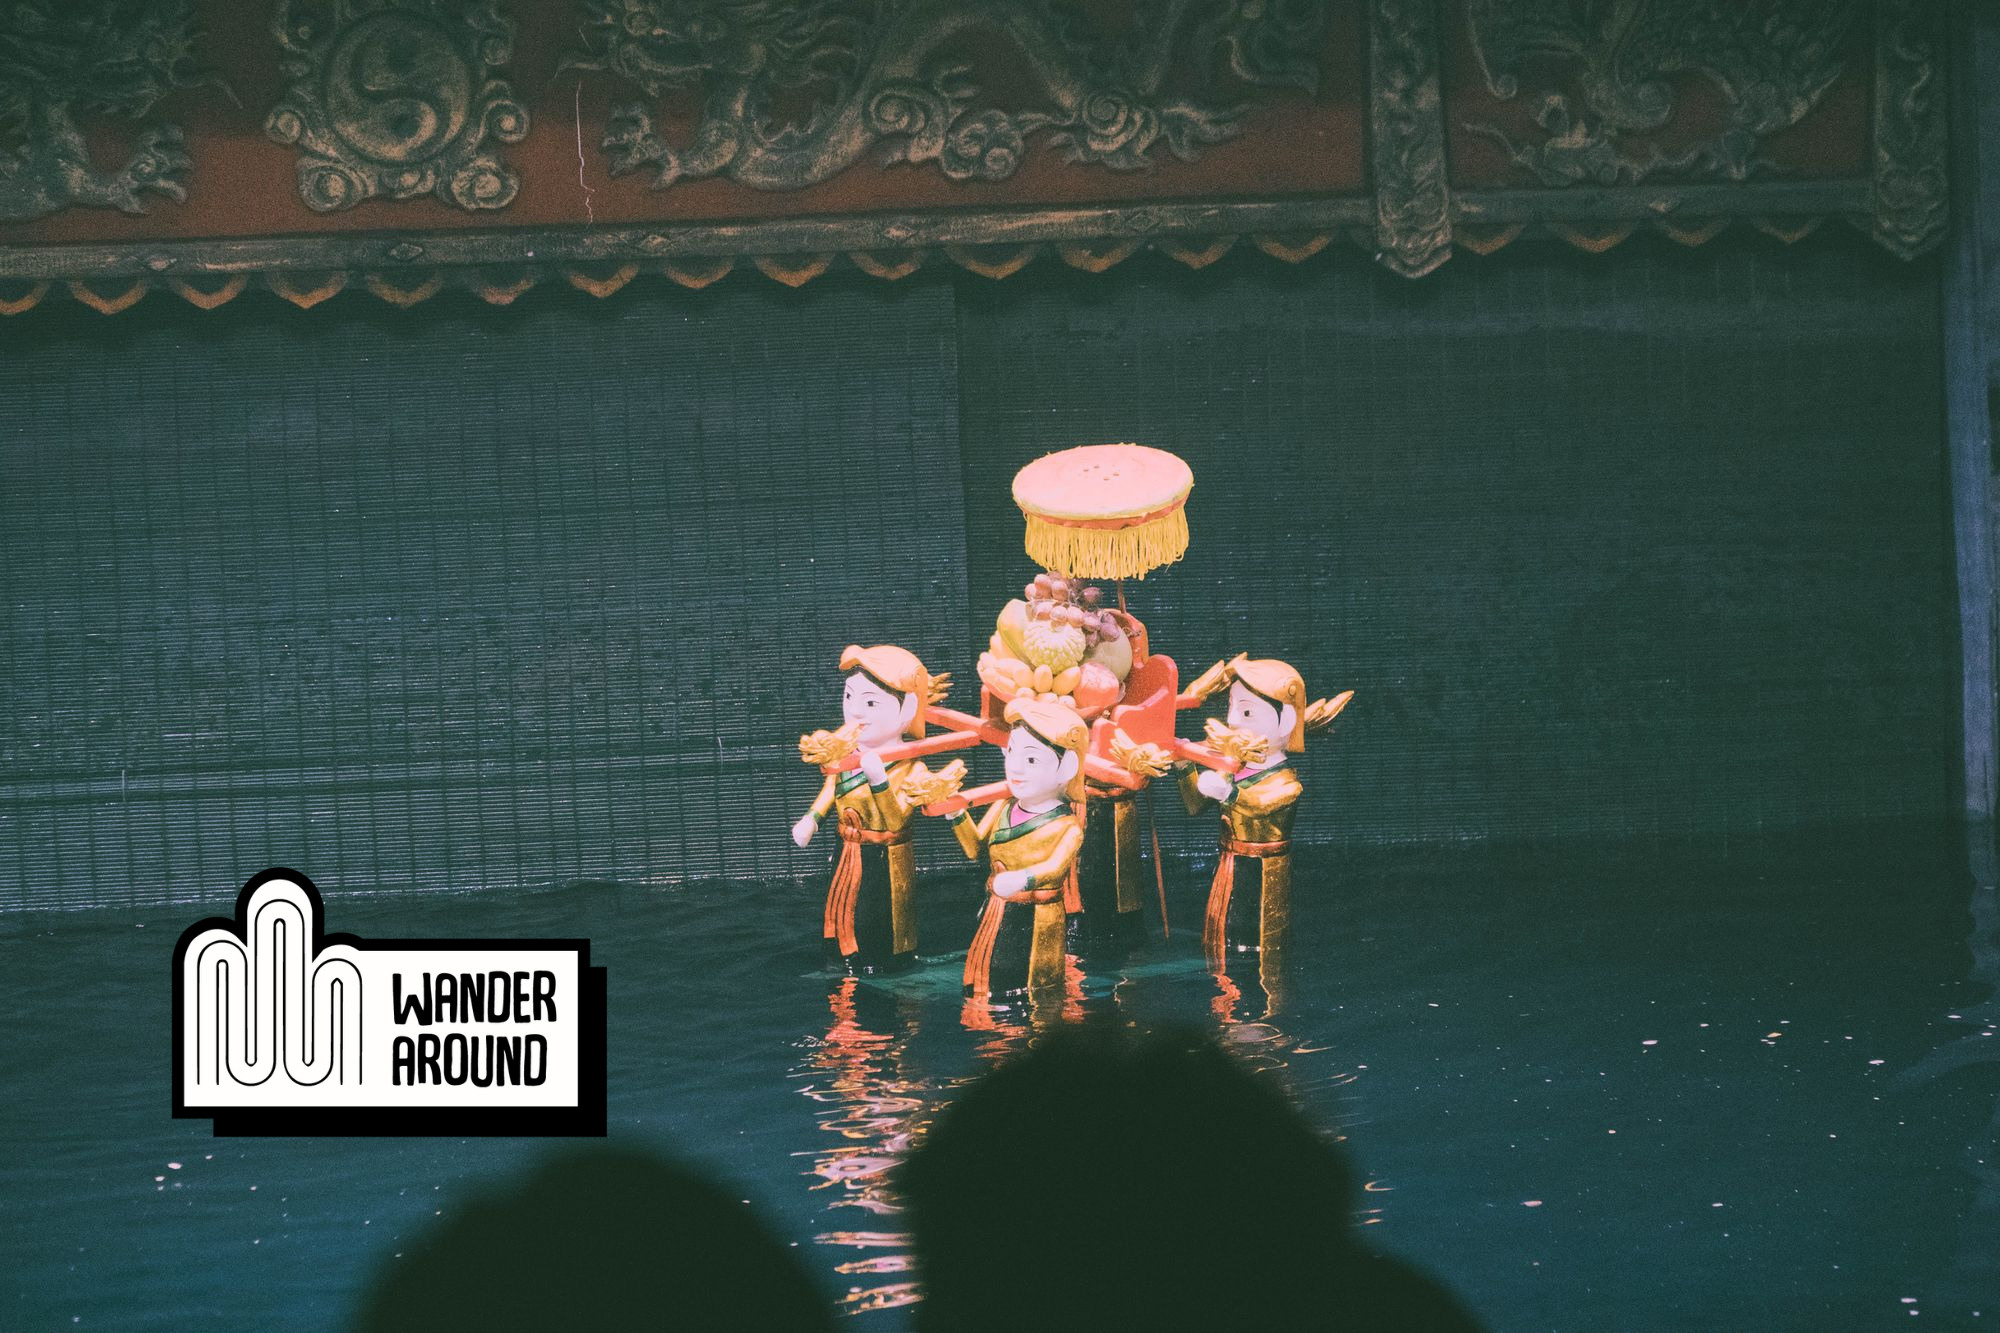 All you need to know about Vietnamese Water puppets